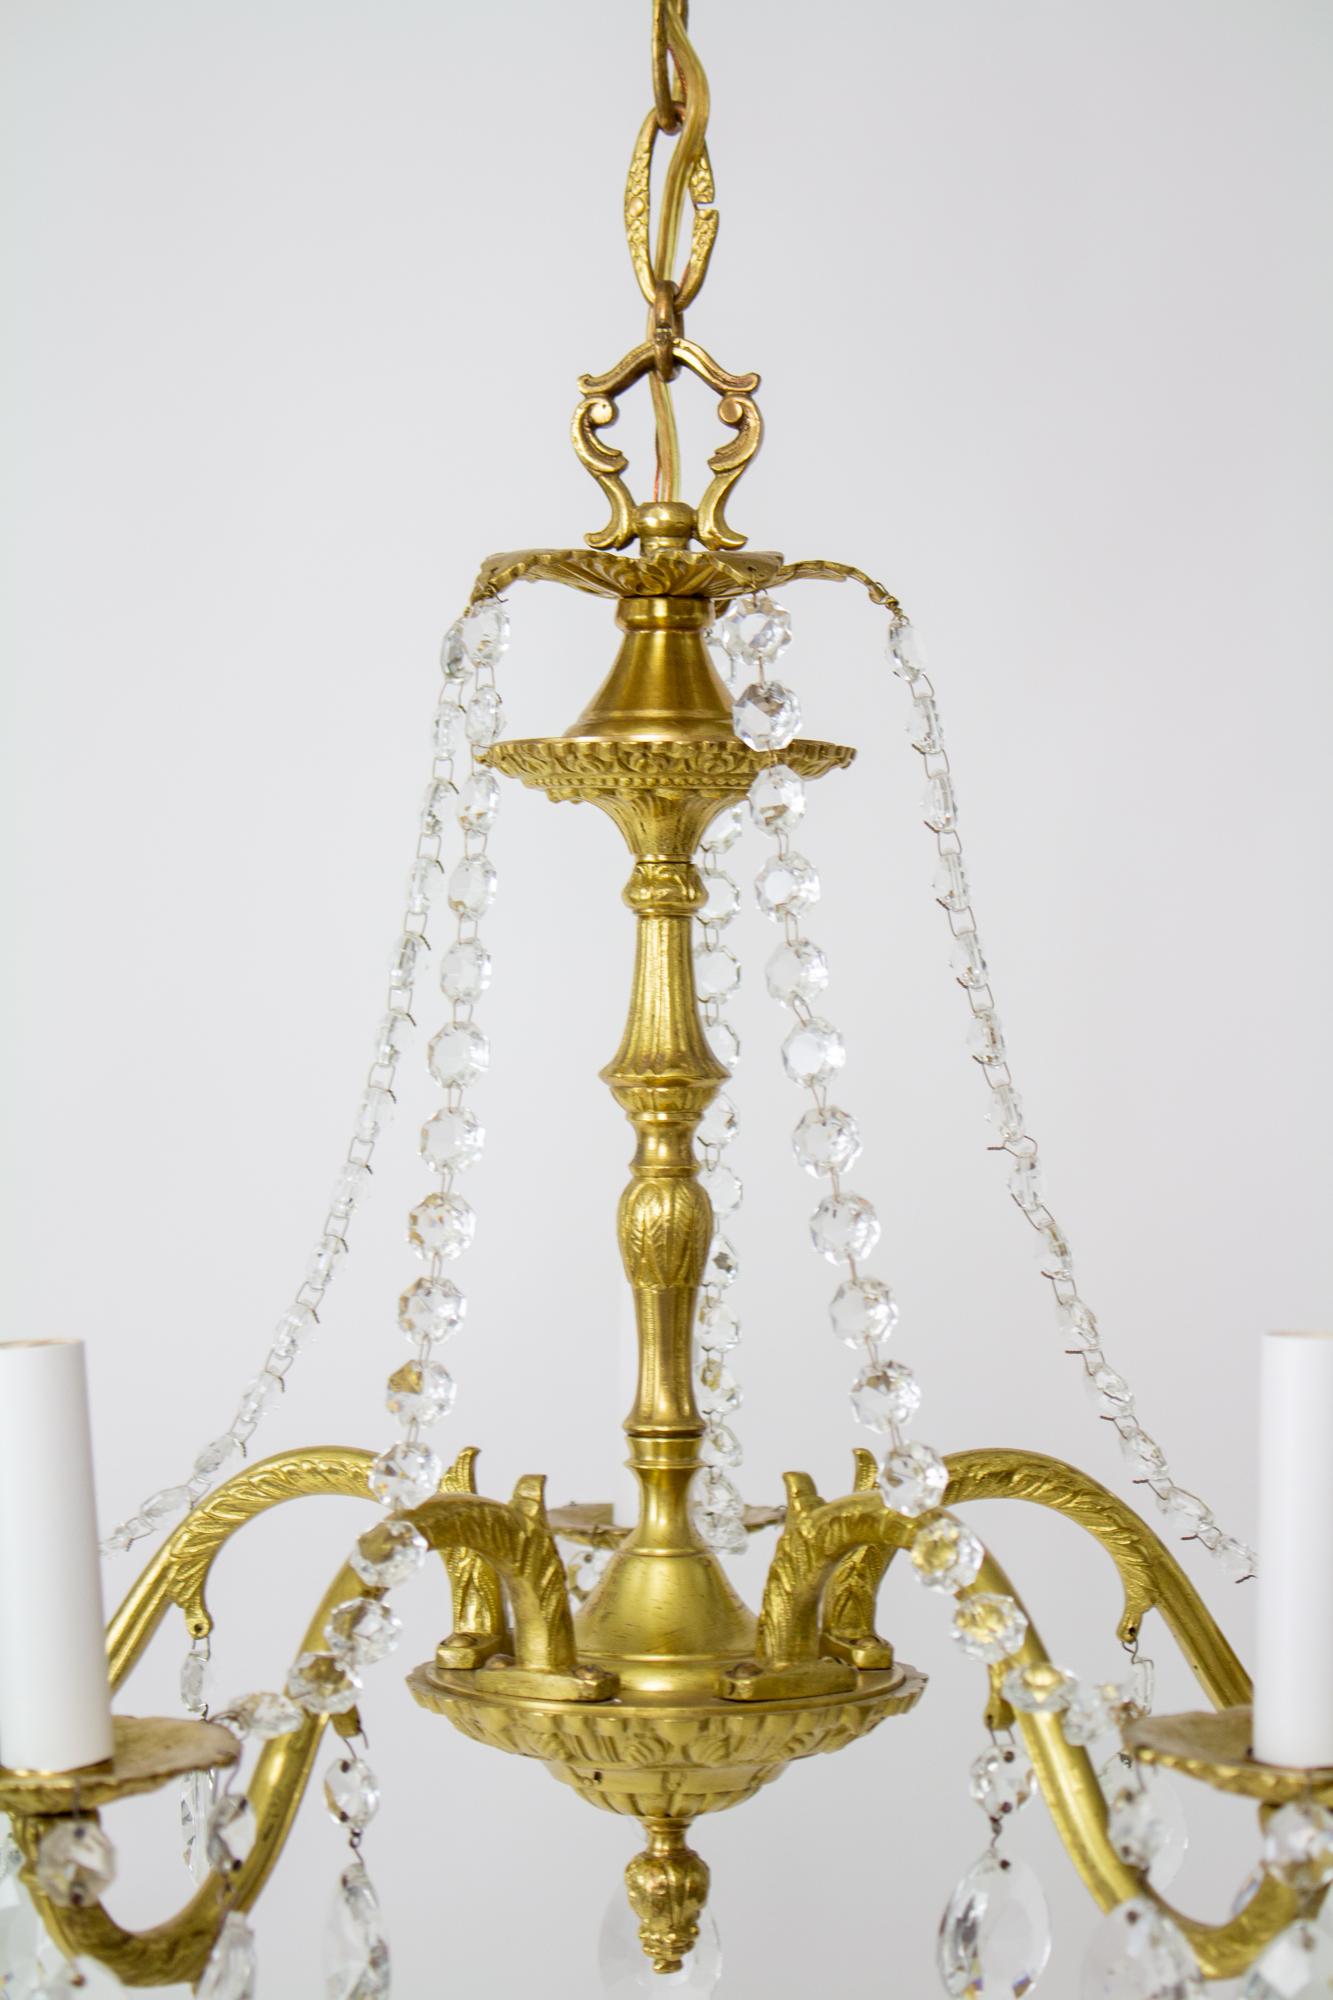 Hollywood Regency Mid-20th Century Five Arm Spanish Cast Brass and Crystal Chandelier For Sale